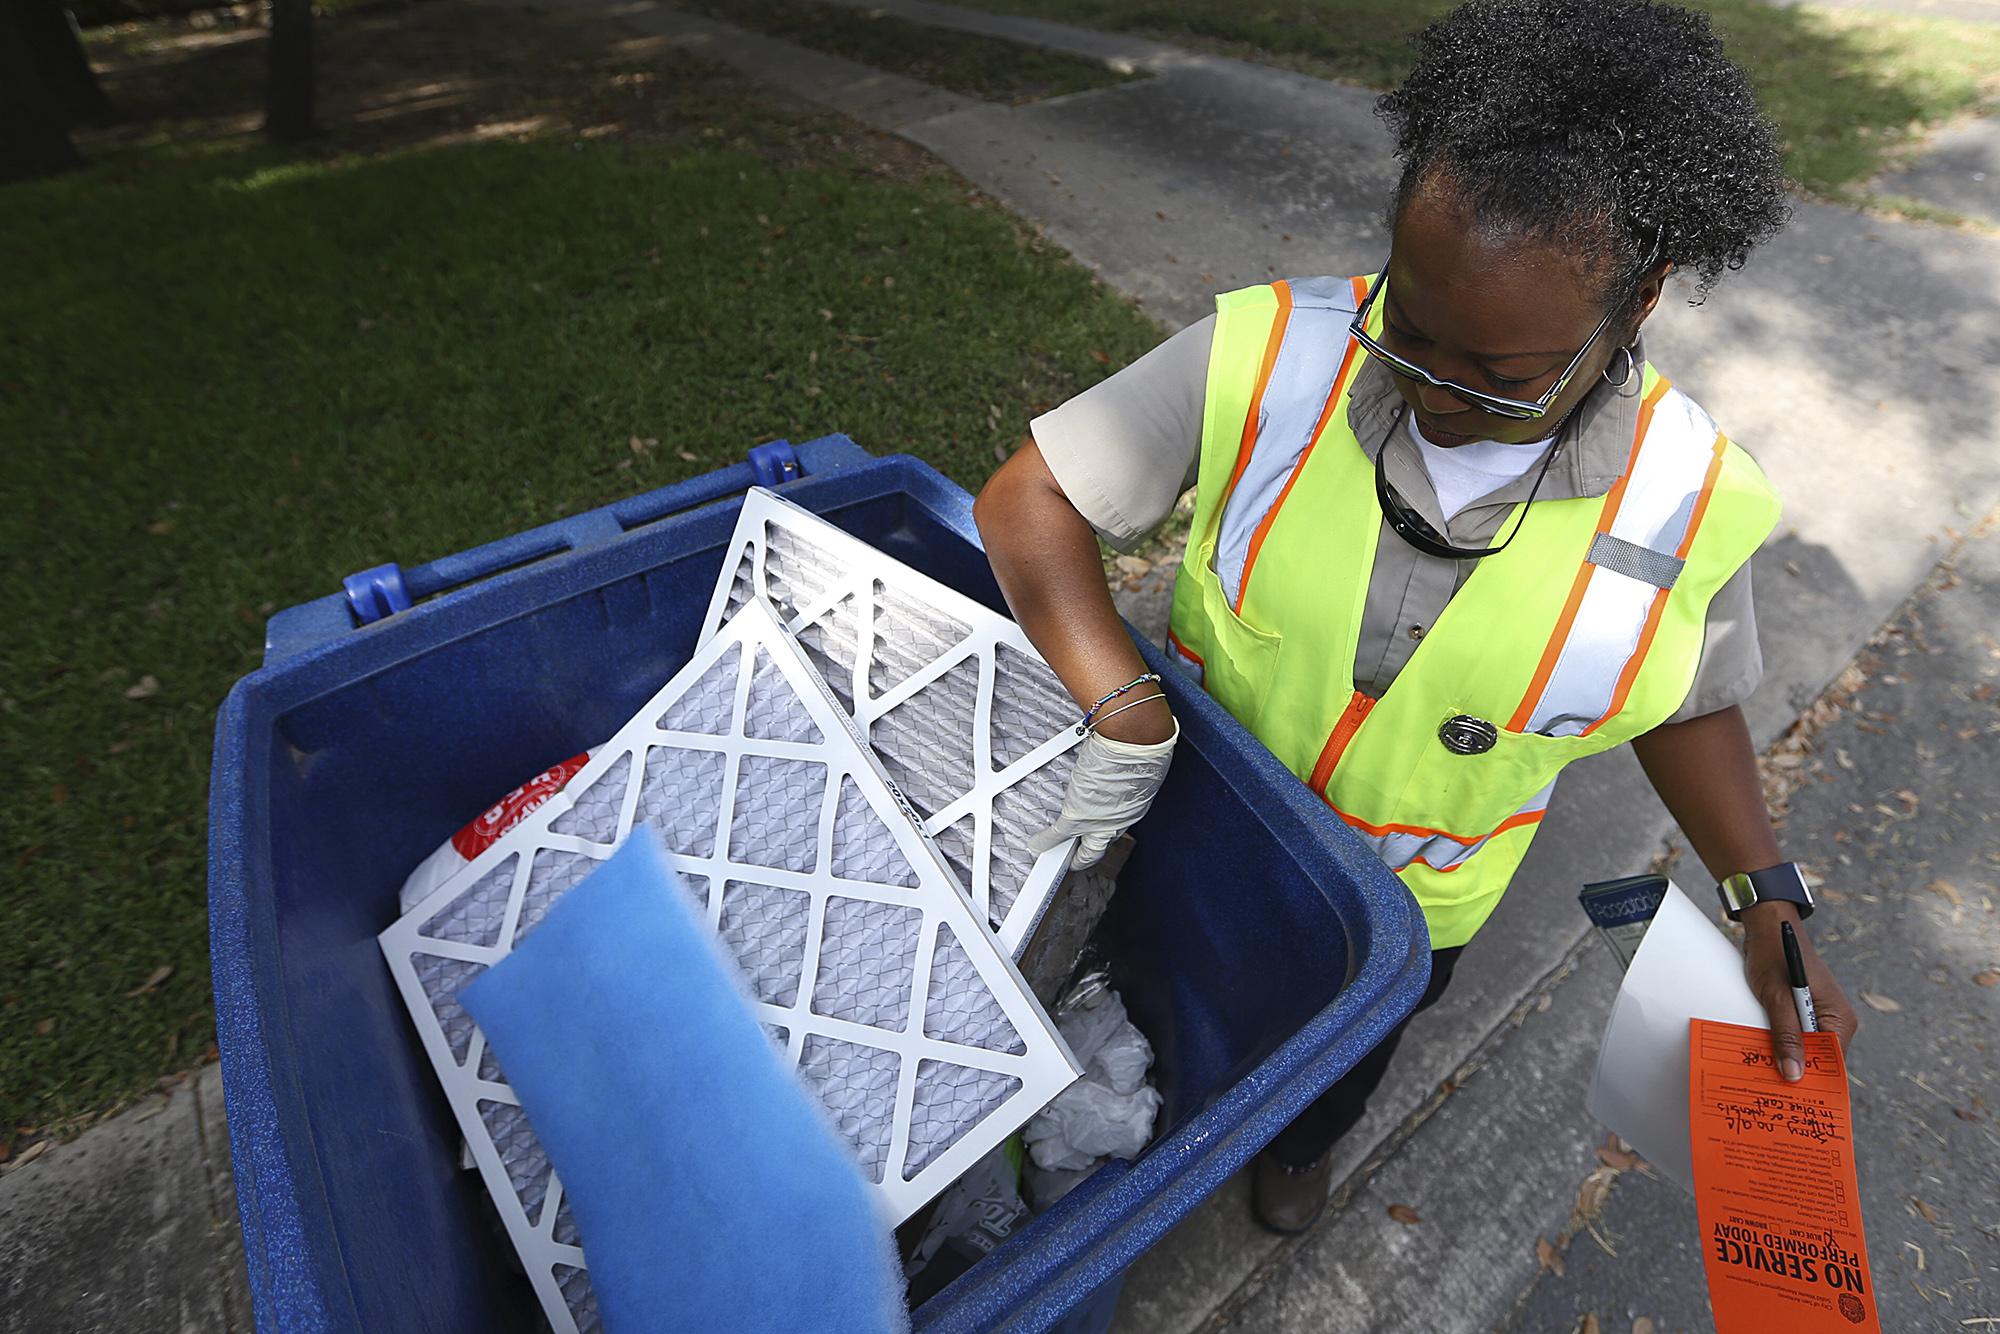 Some smaller cities in San Antonio area cut back on recycling